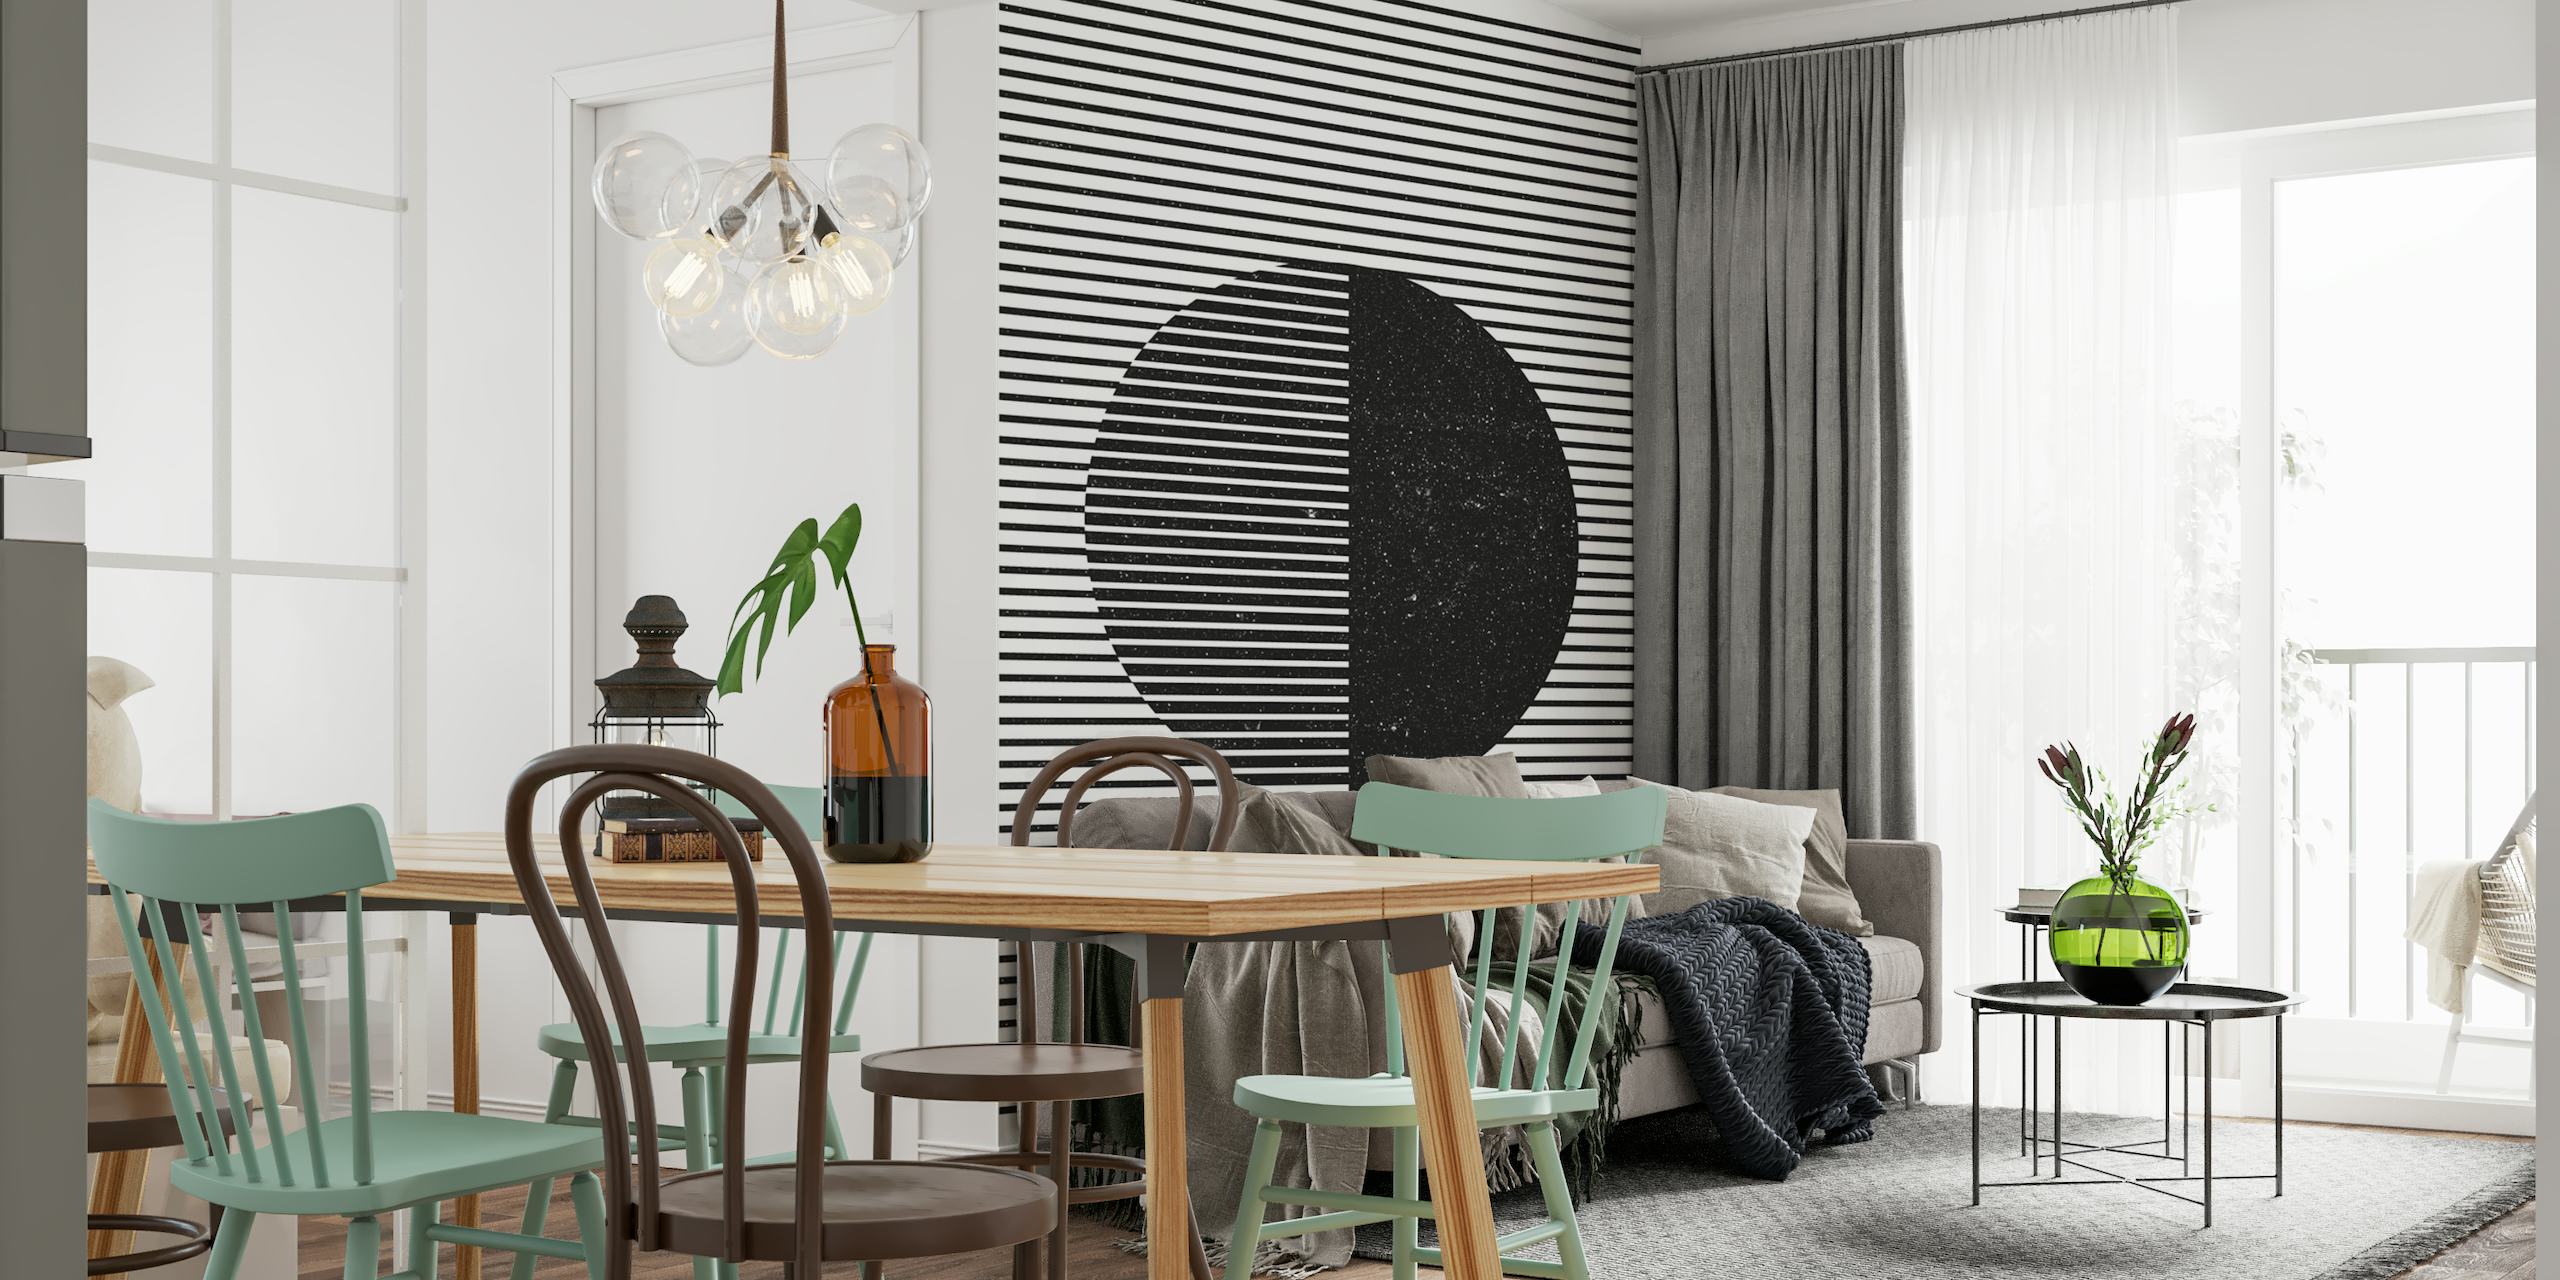 Abstract geometric half-moon wall mural in black and white